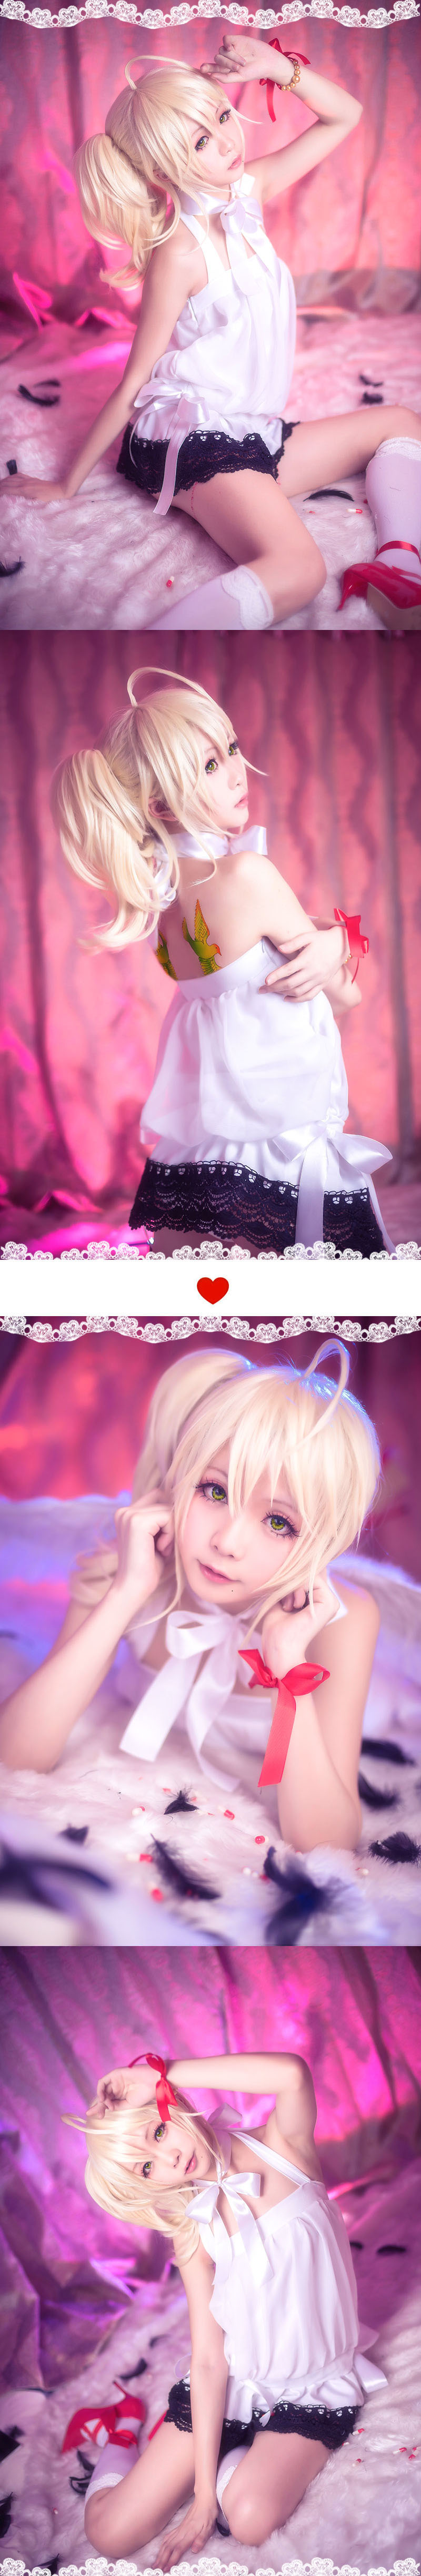 Star's Delay to December 22, Coser Hoshilly BCY Collection 8(12)